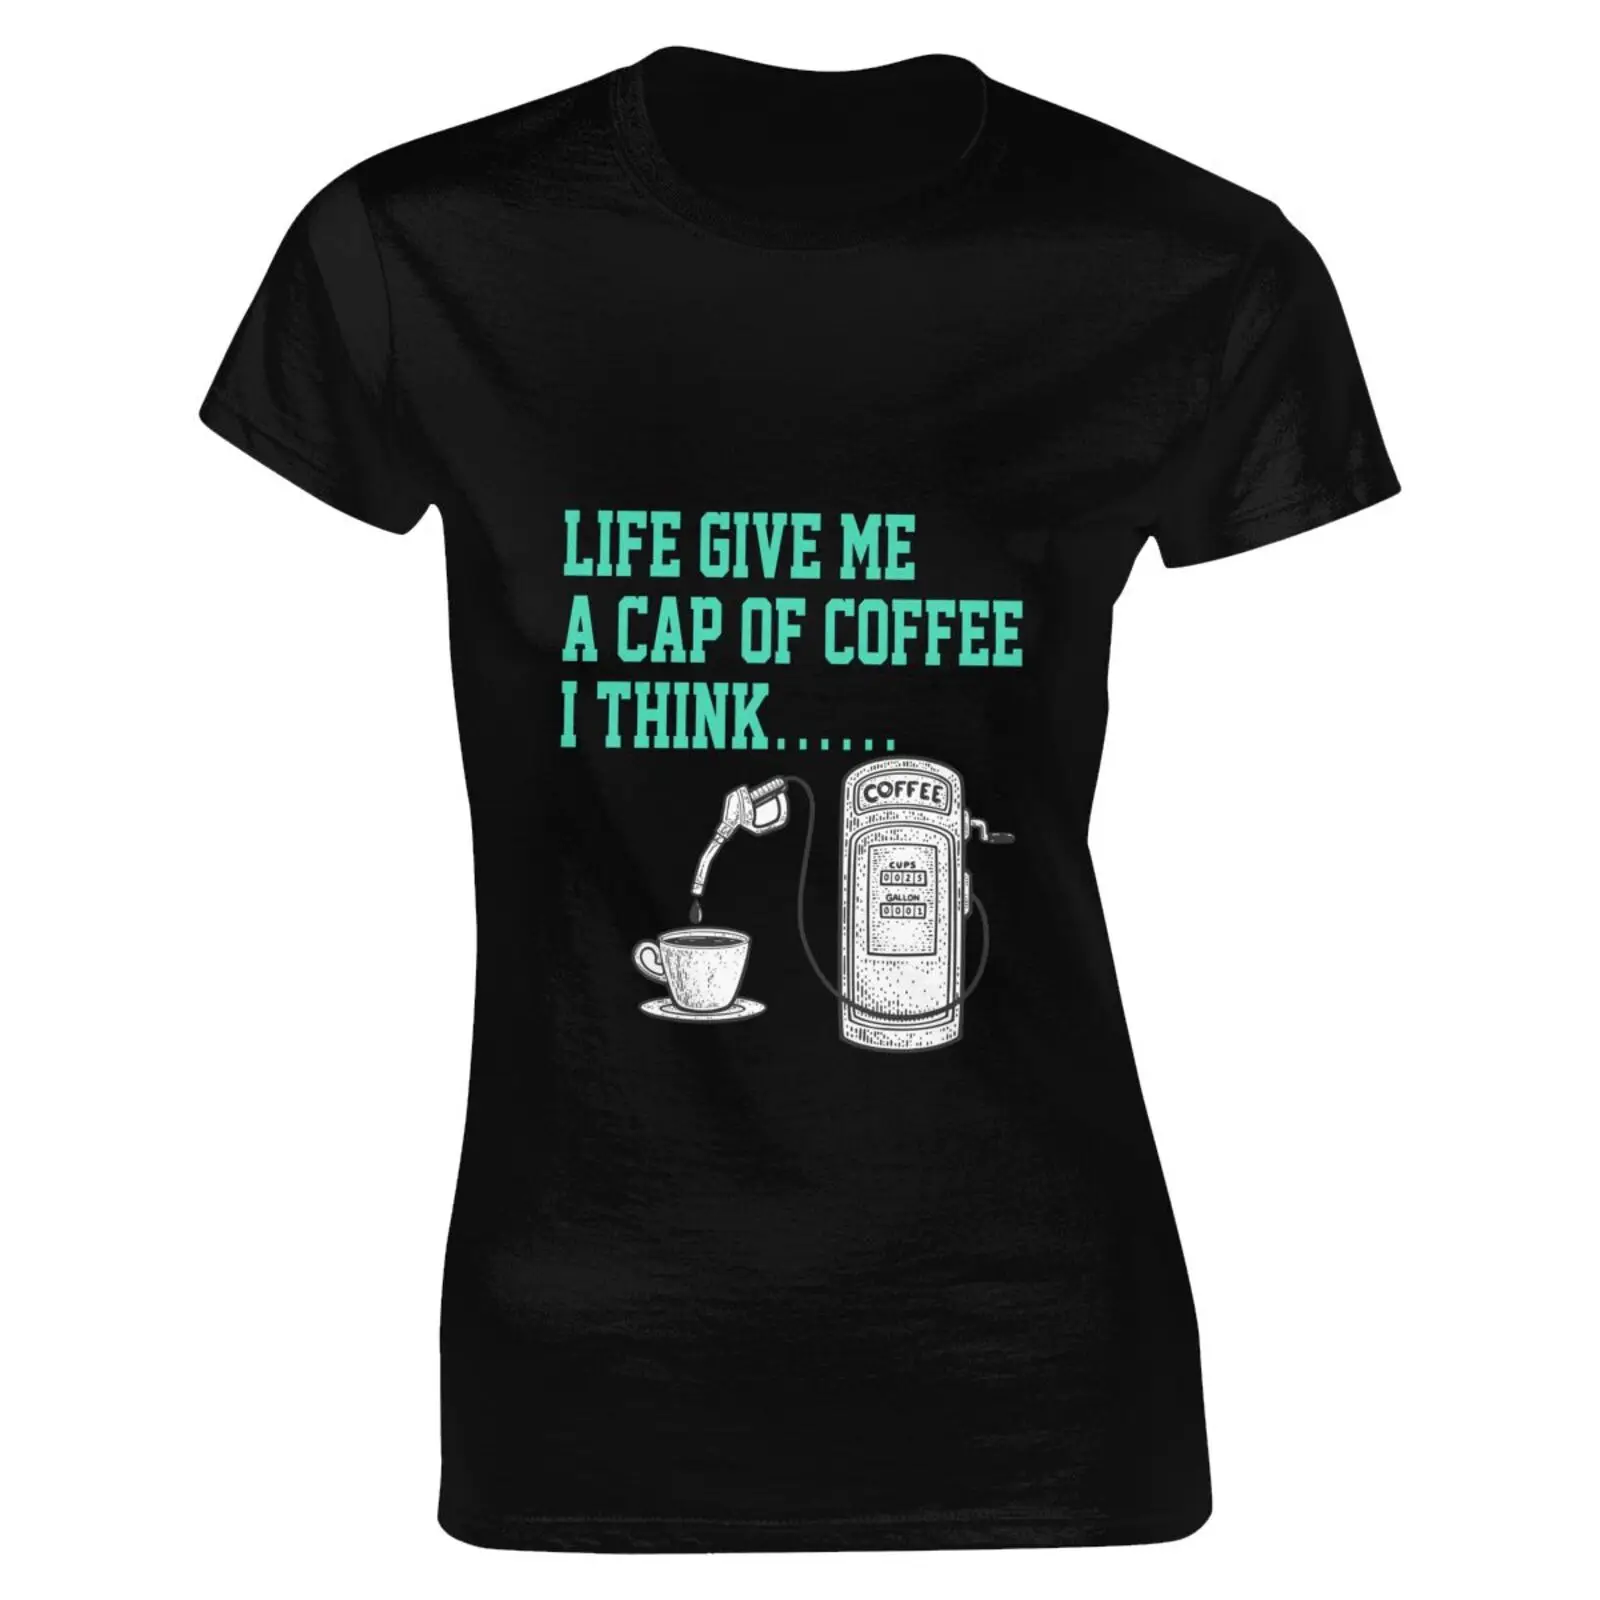 

Women's Cotton LIFE GIVE ME A CAP OF COFFEE I THINK Flowers Will Funny Hipster Sayings Cute Graphic WordArt S-XL